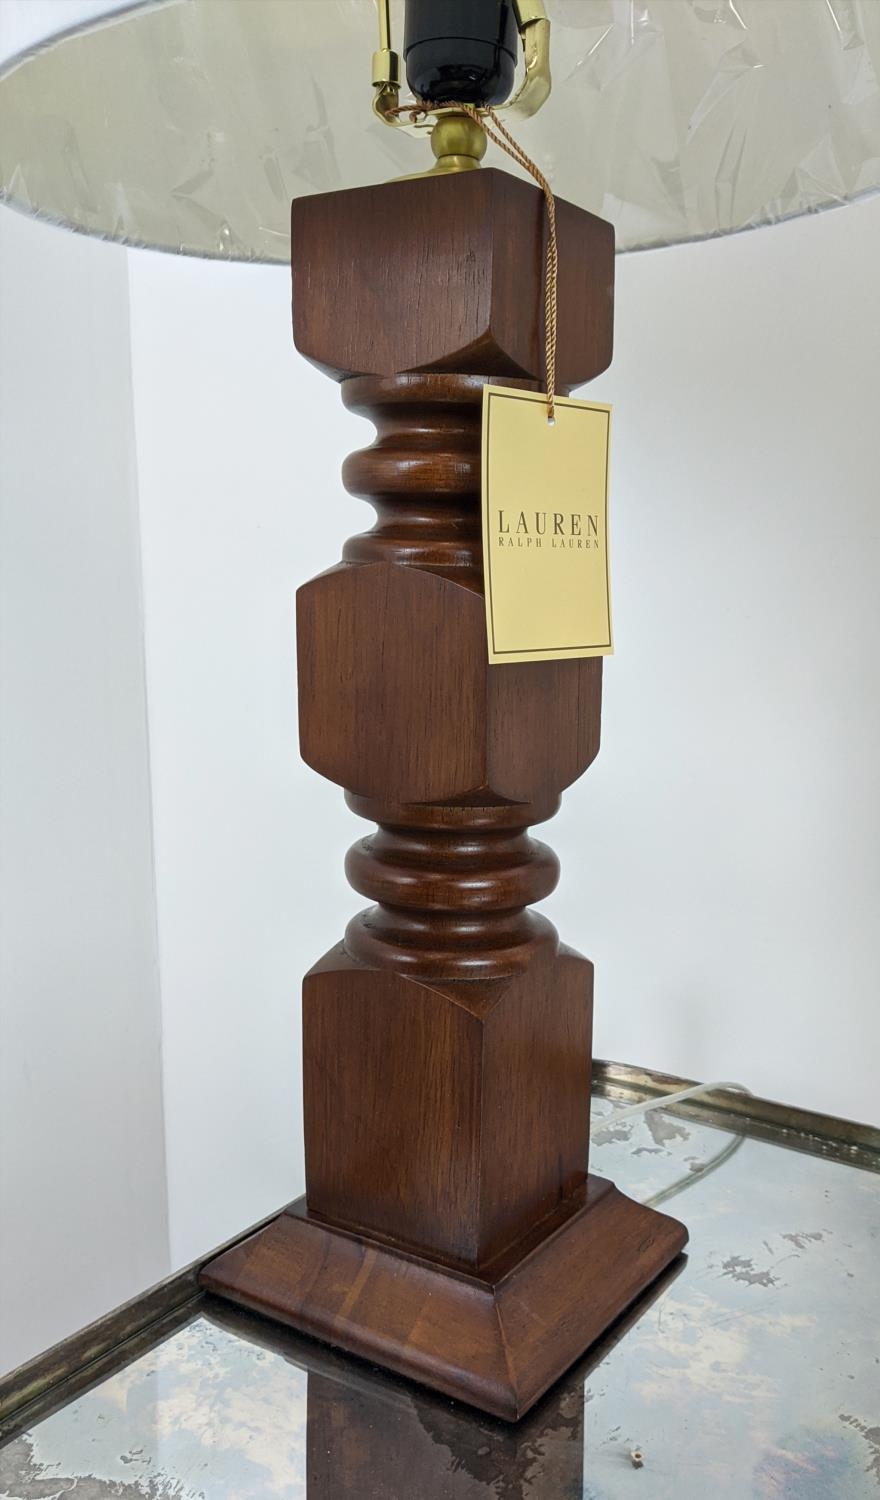 LAUREN RALPH LAUREN HOME TABLE LAMPS, a pair, carved wood, with shades, 68cm H approx. (2) - Image 4 of 5